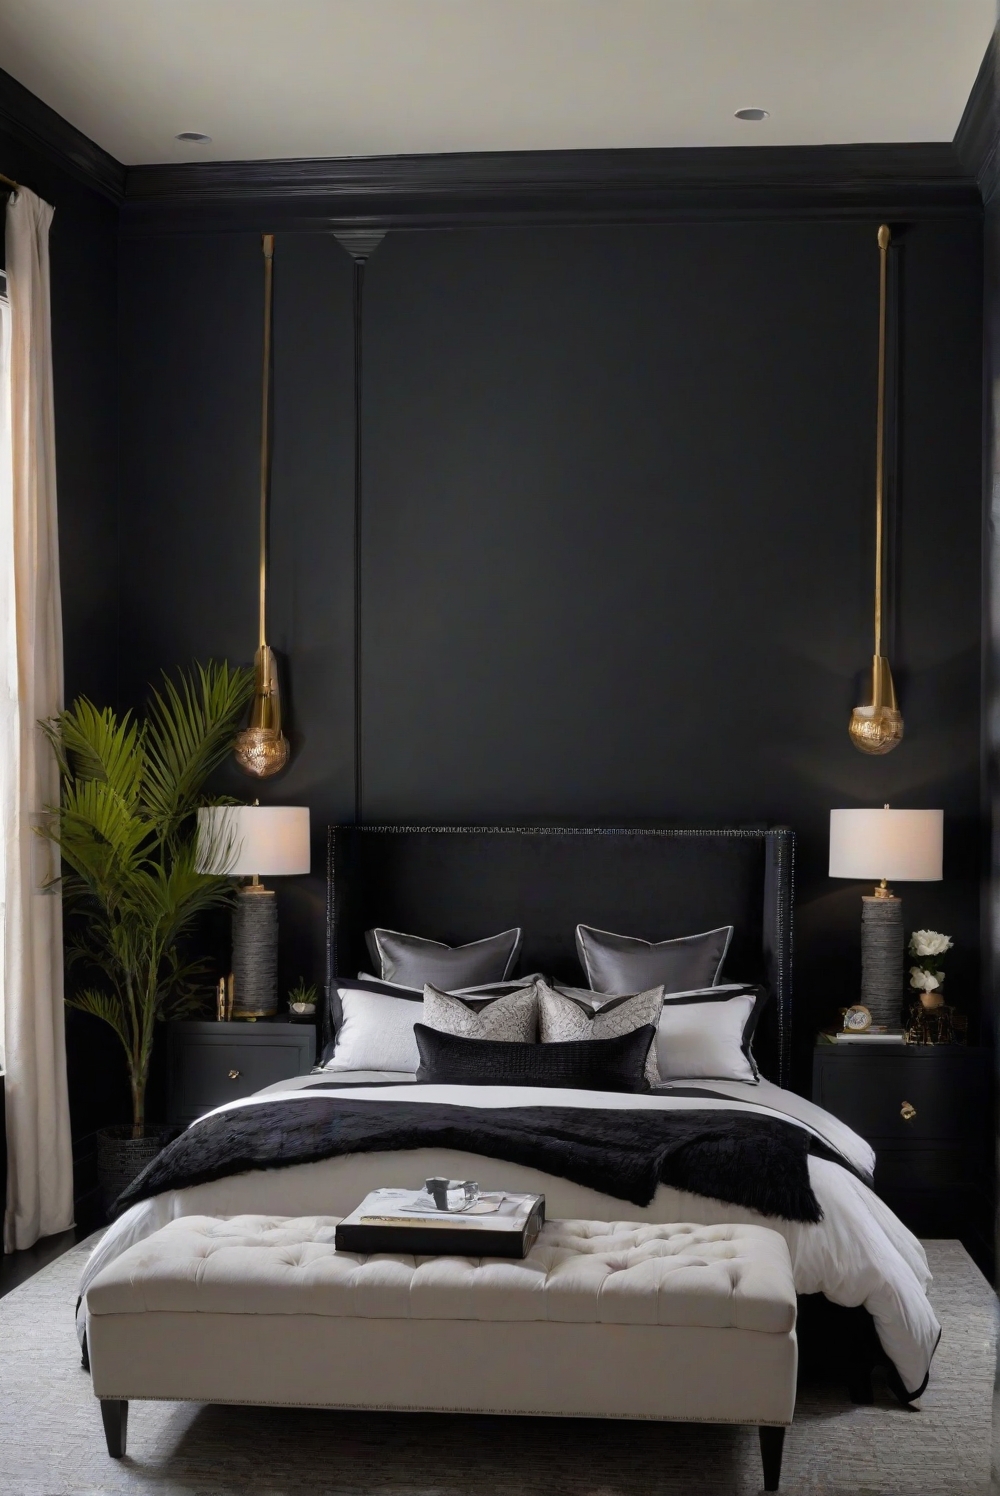 bold black paint, elegant interior design, sophisticated home decor, dark wall colors, luxury home interiors, dramatic room design, chic interior styling